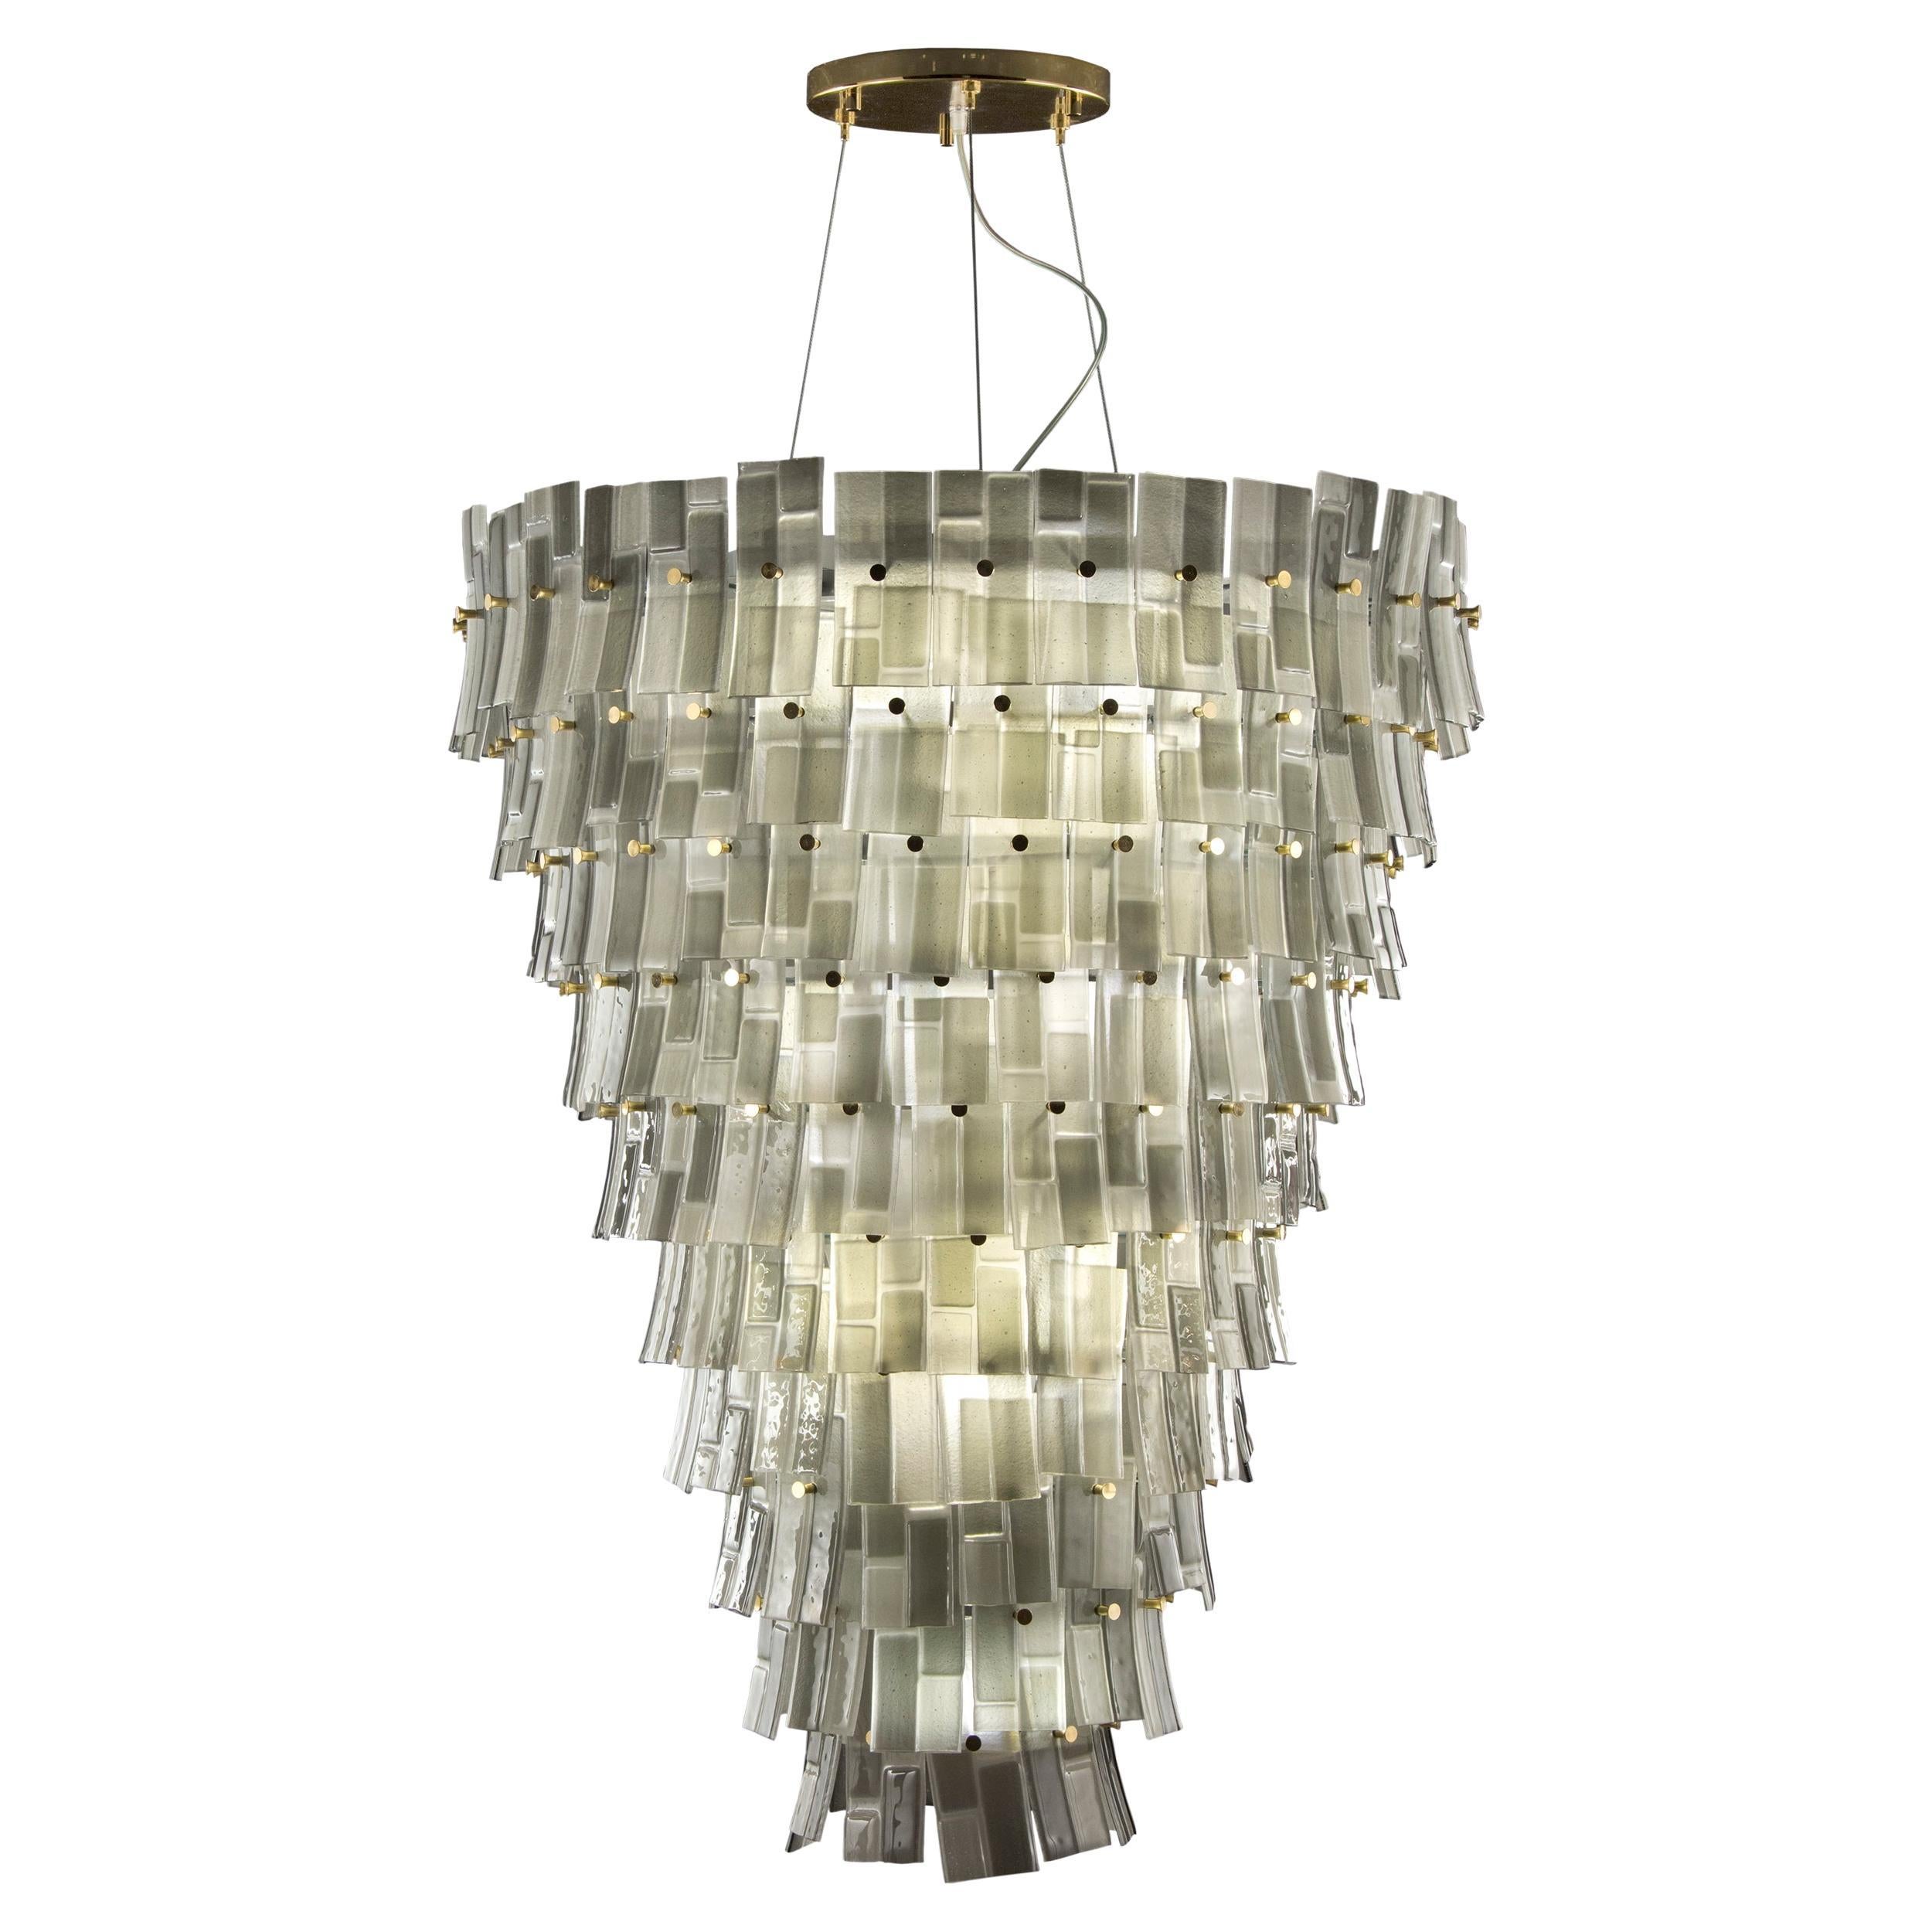 Big Suspension Lamp Grey Murano Glass Listels, Gold Fixture by Multiforme